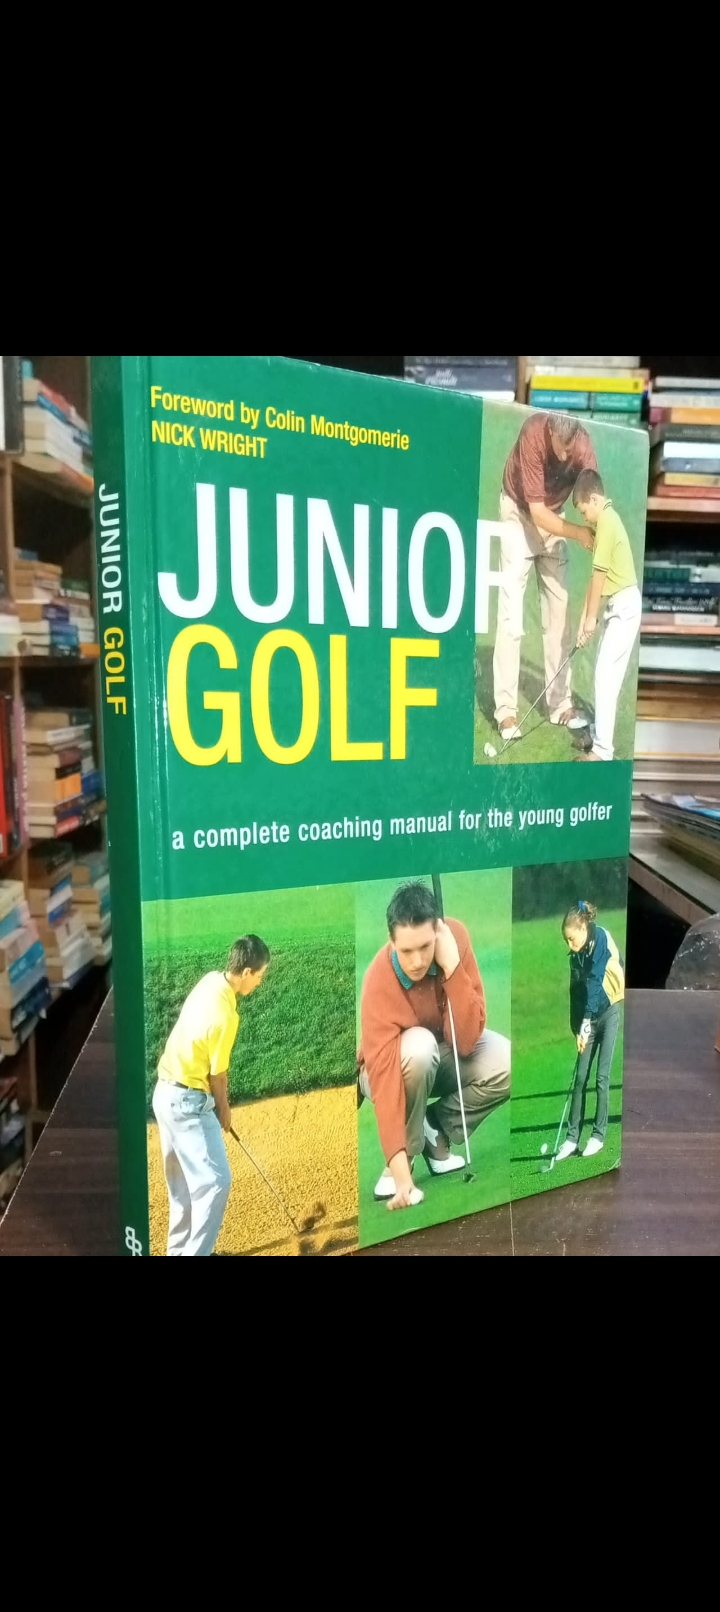 junior golf a complete coaching manual for the young golfer. original hardcover large size